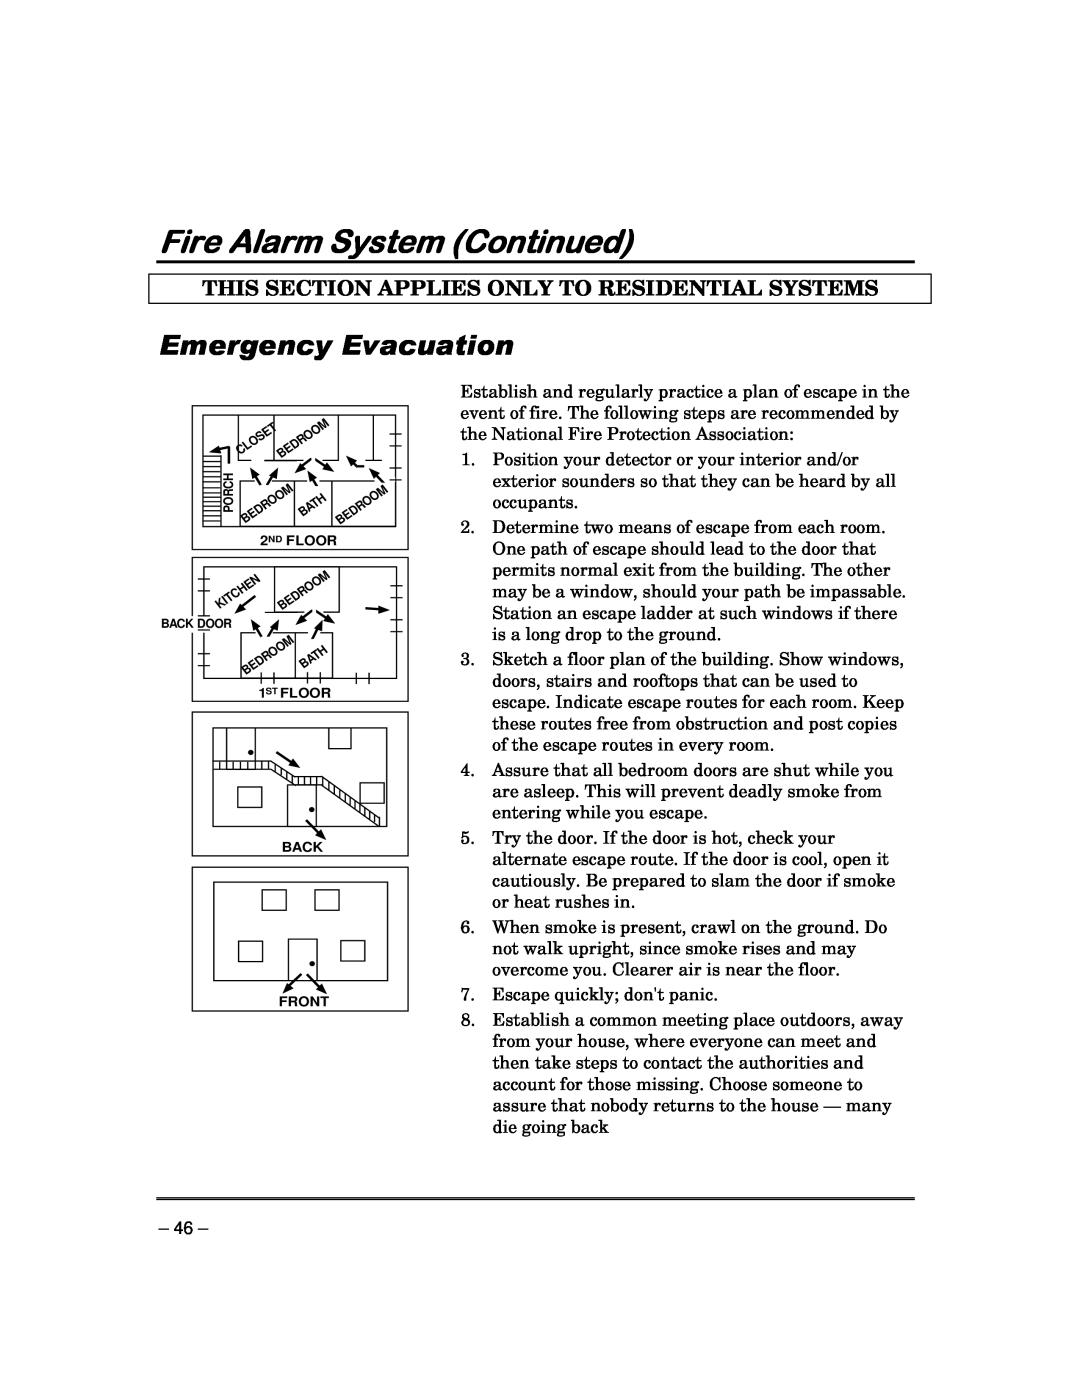 Garmin FA168CPS manual Emergency Evacuation, Fire Alarm System Continued, This Section Applies Only To Residential Systems 